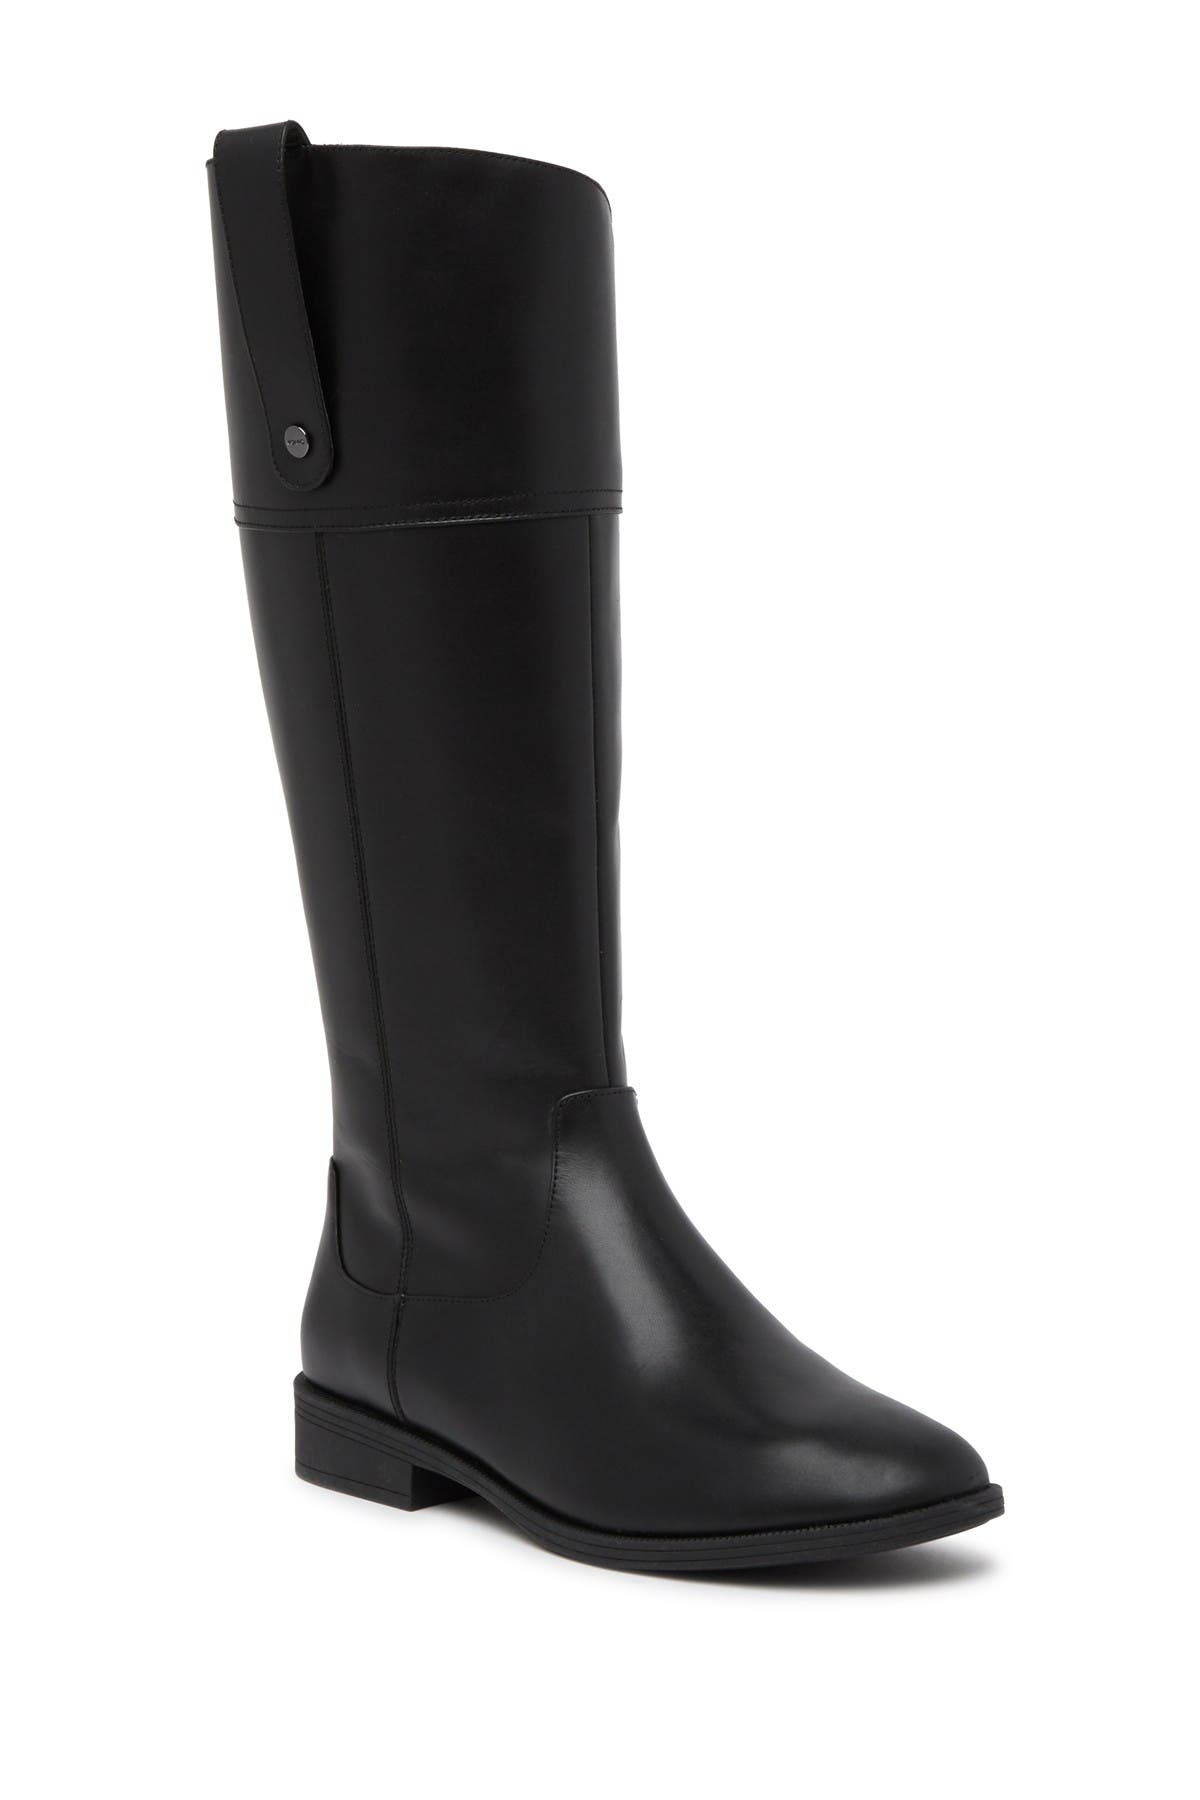 Vionic | Mayes Leather Riding Boot 